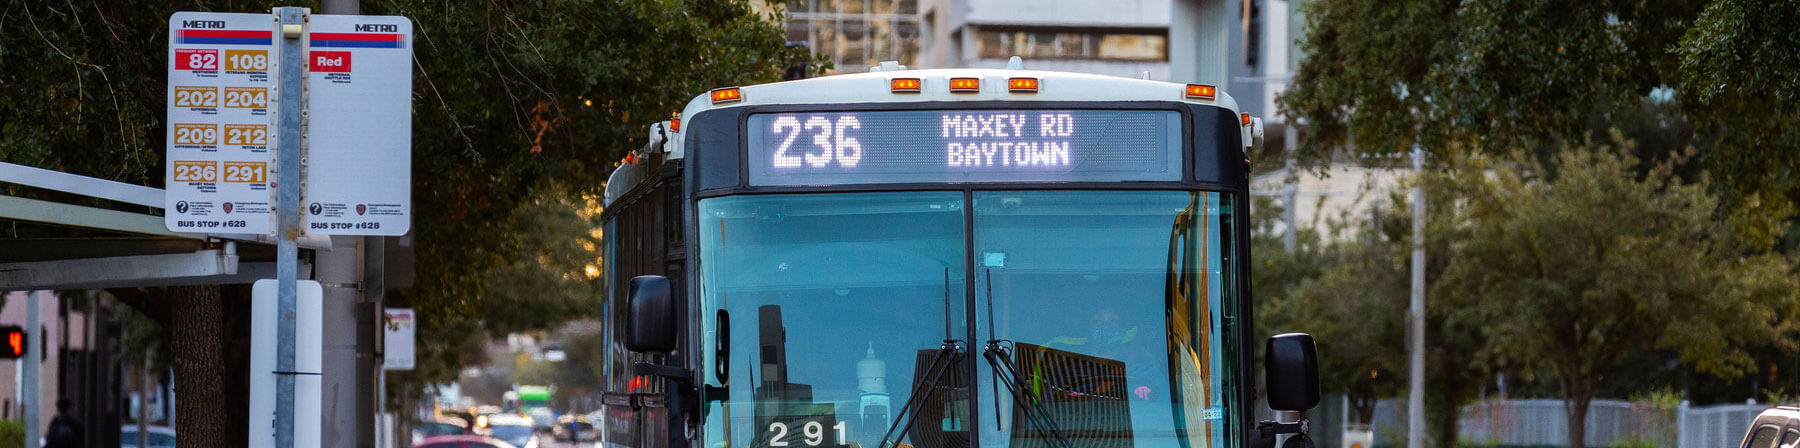 236 Maxey Road Park & Ride bus